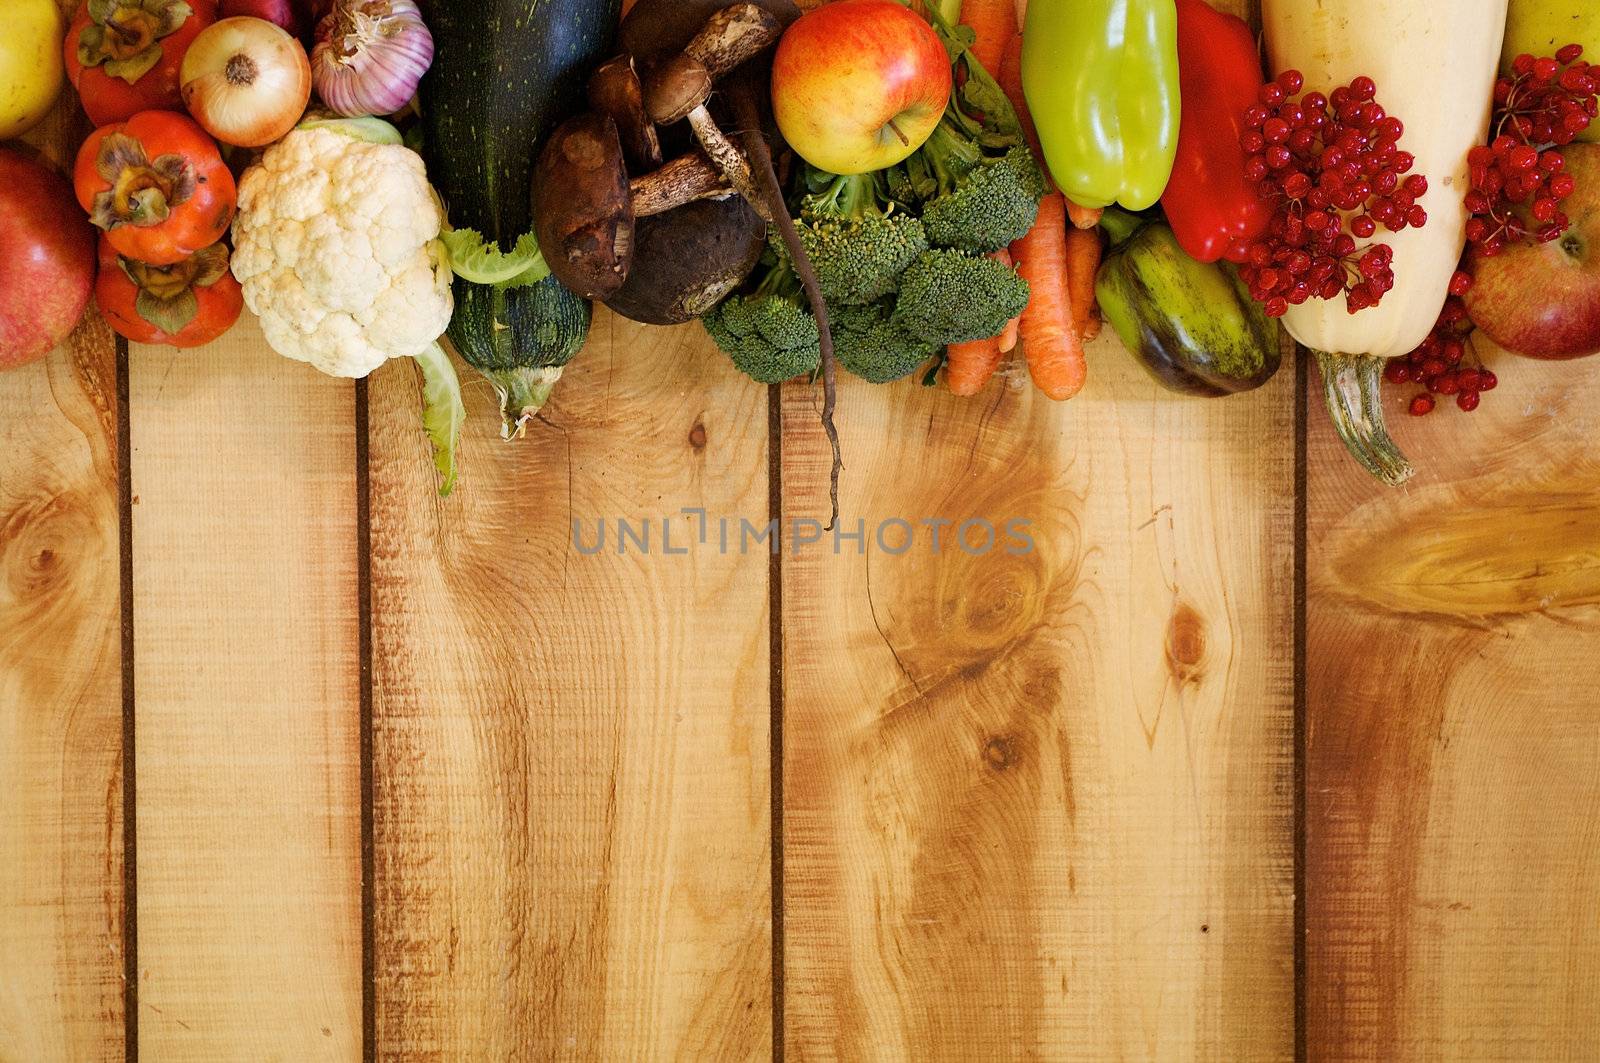 Frame New Harvest Autumn Yield with Vegetables, Fruits, Mushrooms and Berries closeup on Wooden background